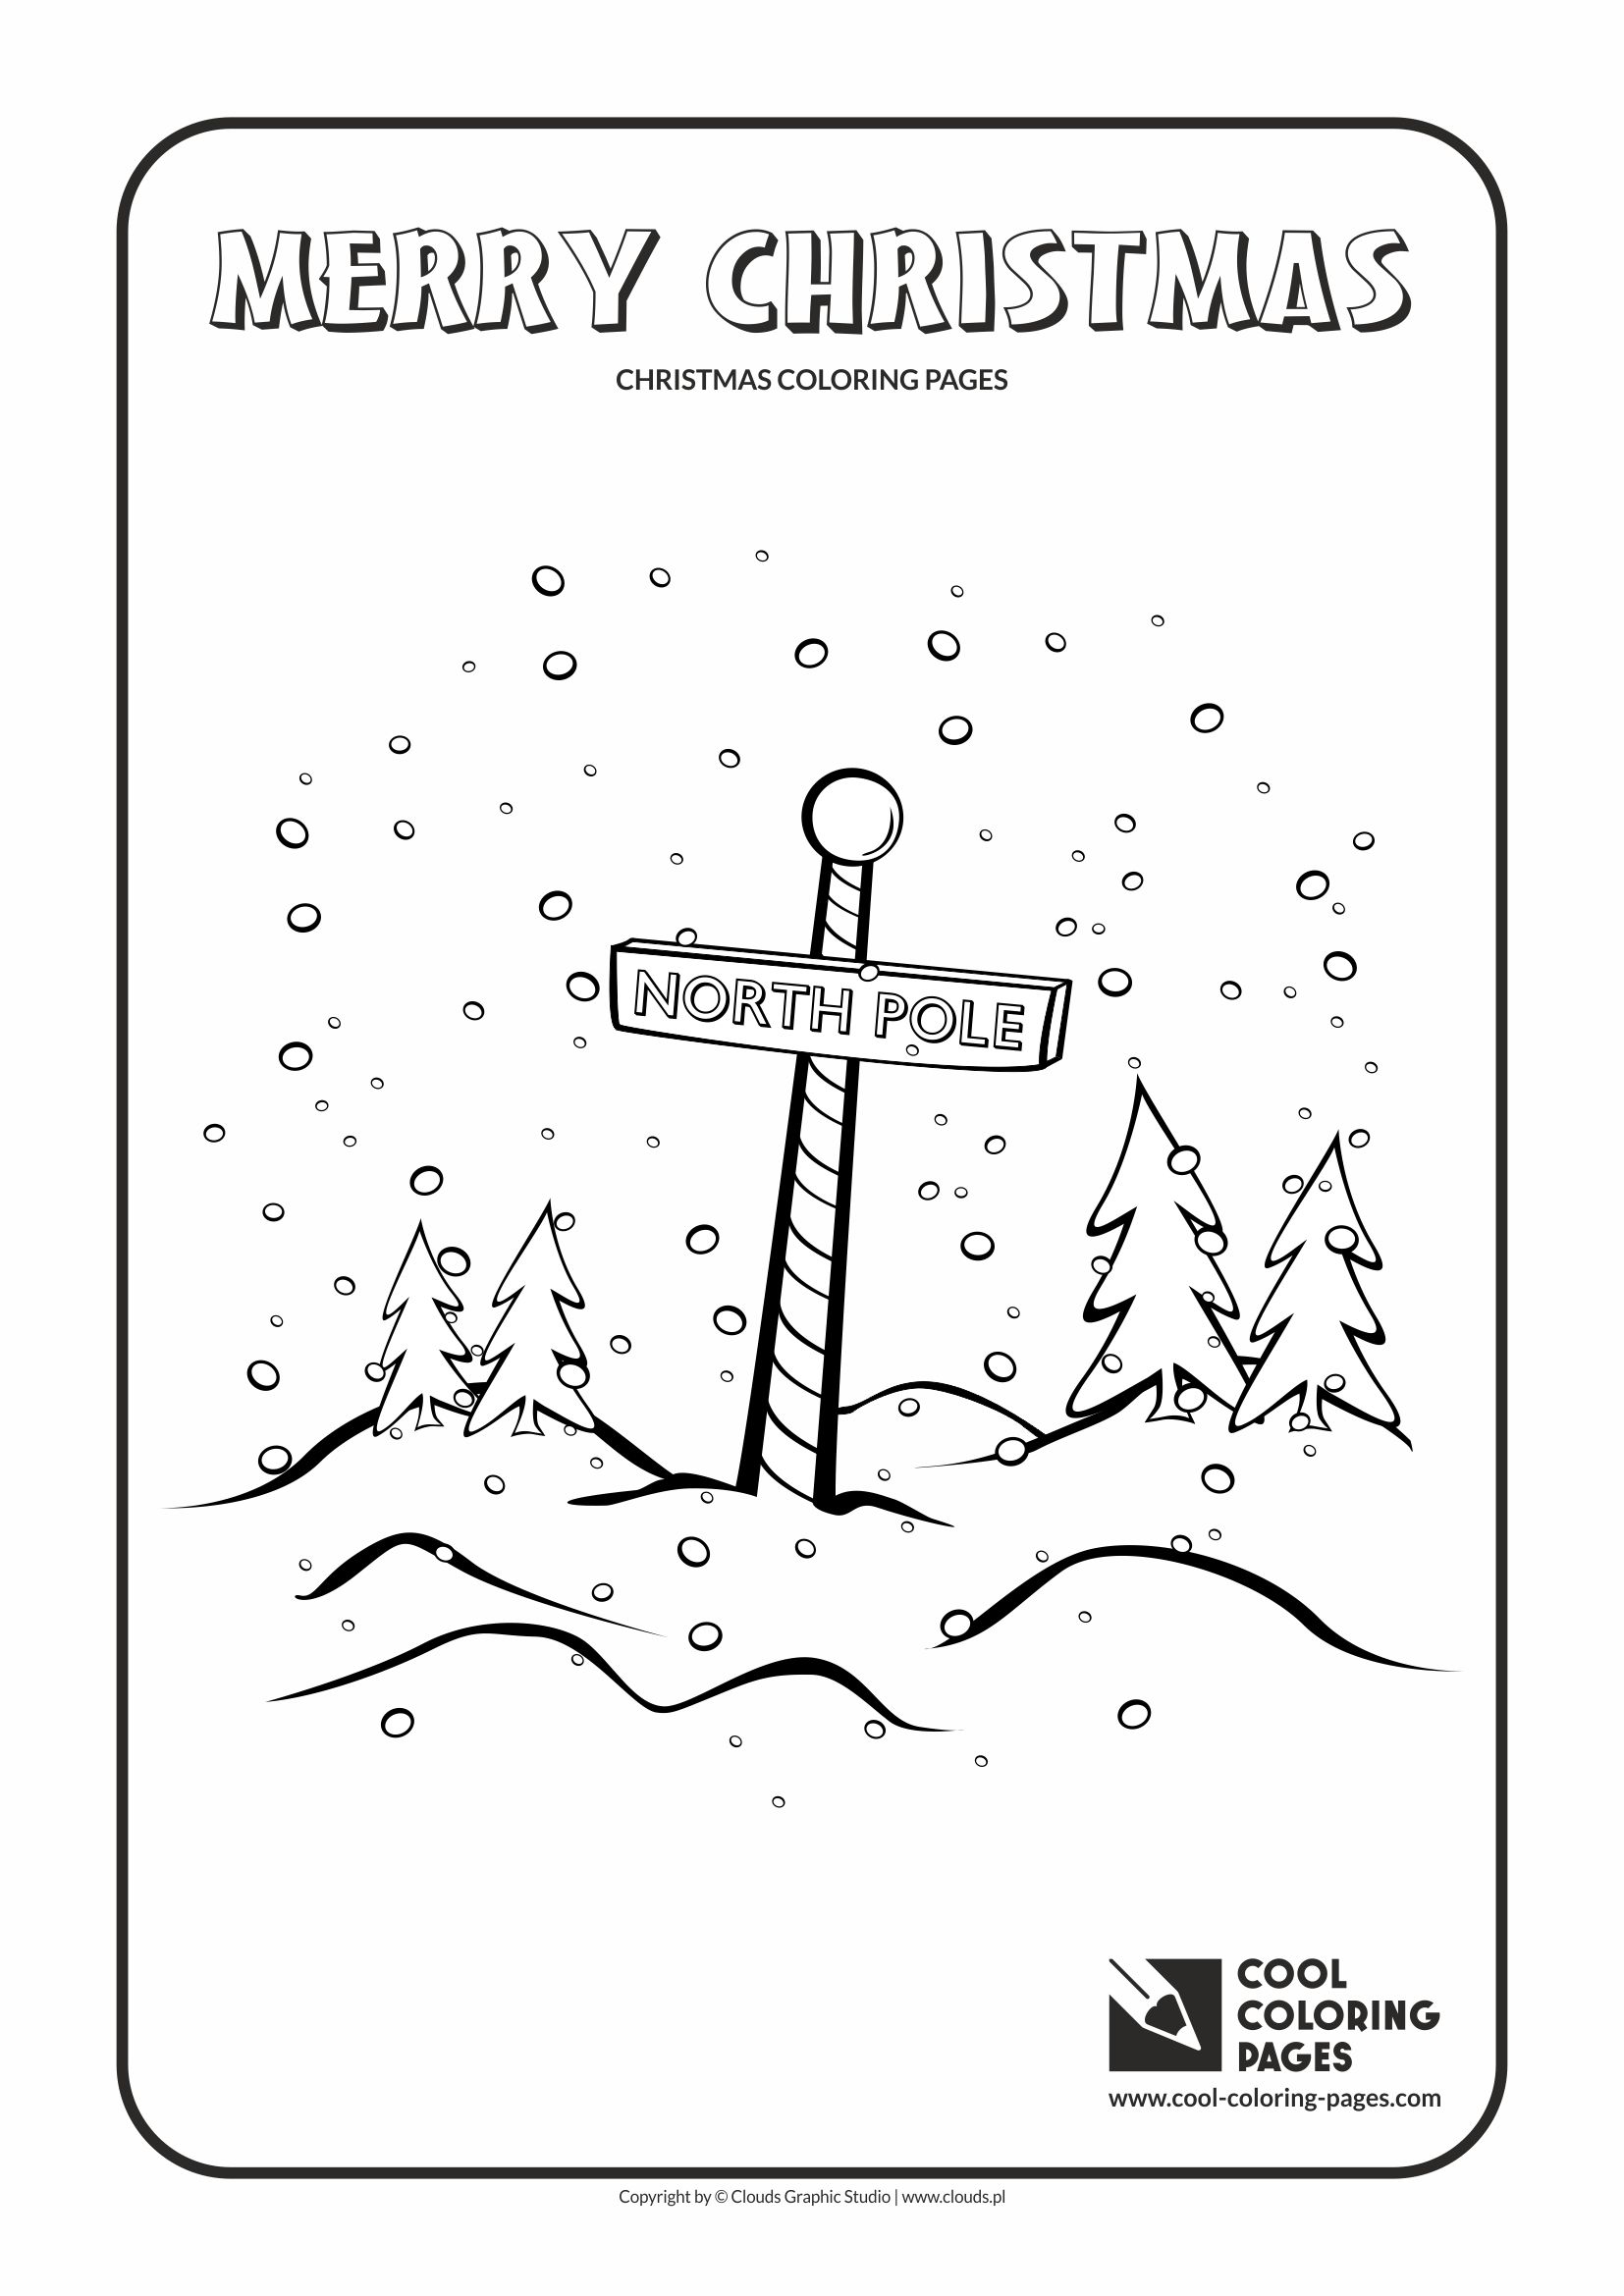 Cool coloring pages christmas coloring pages